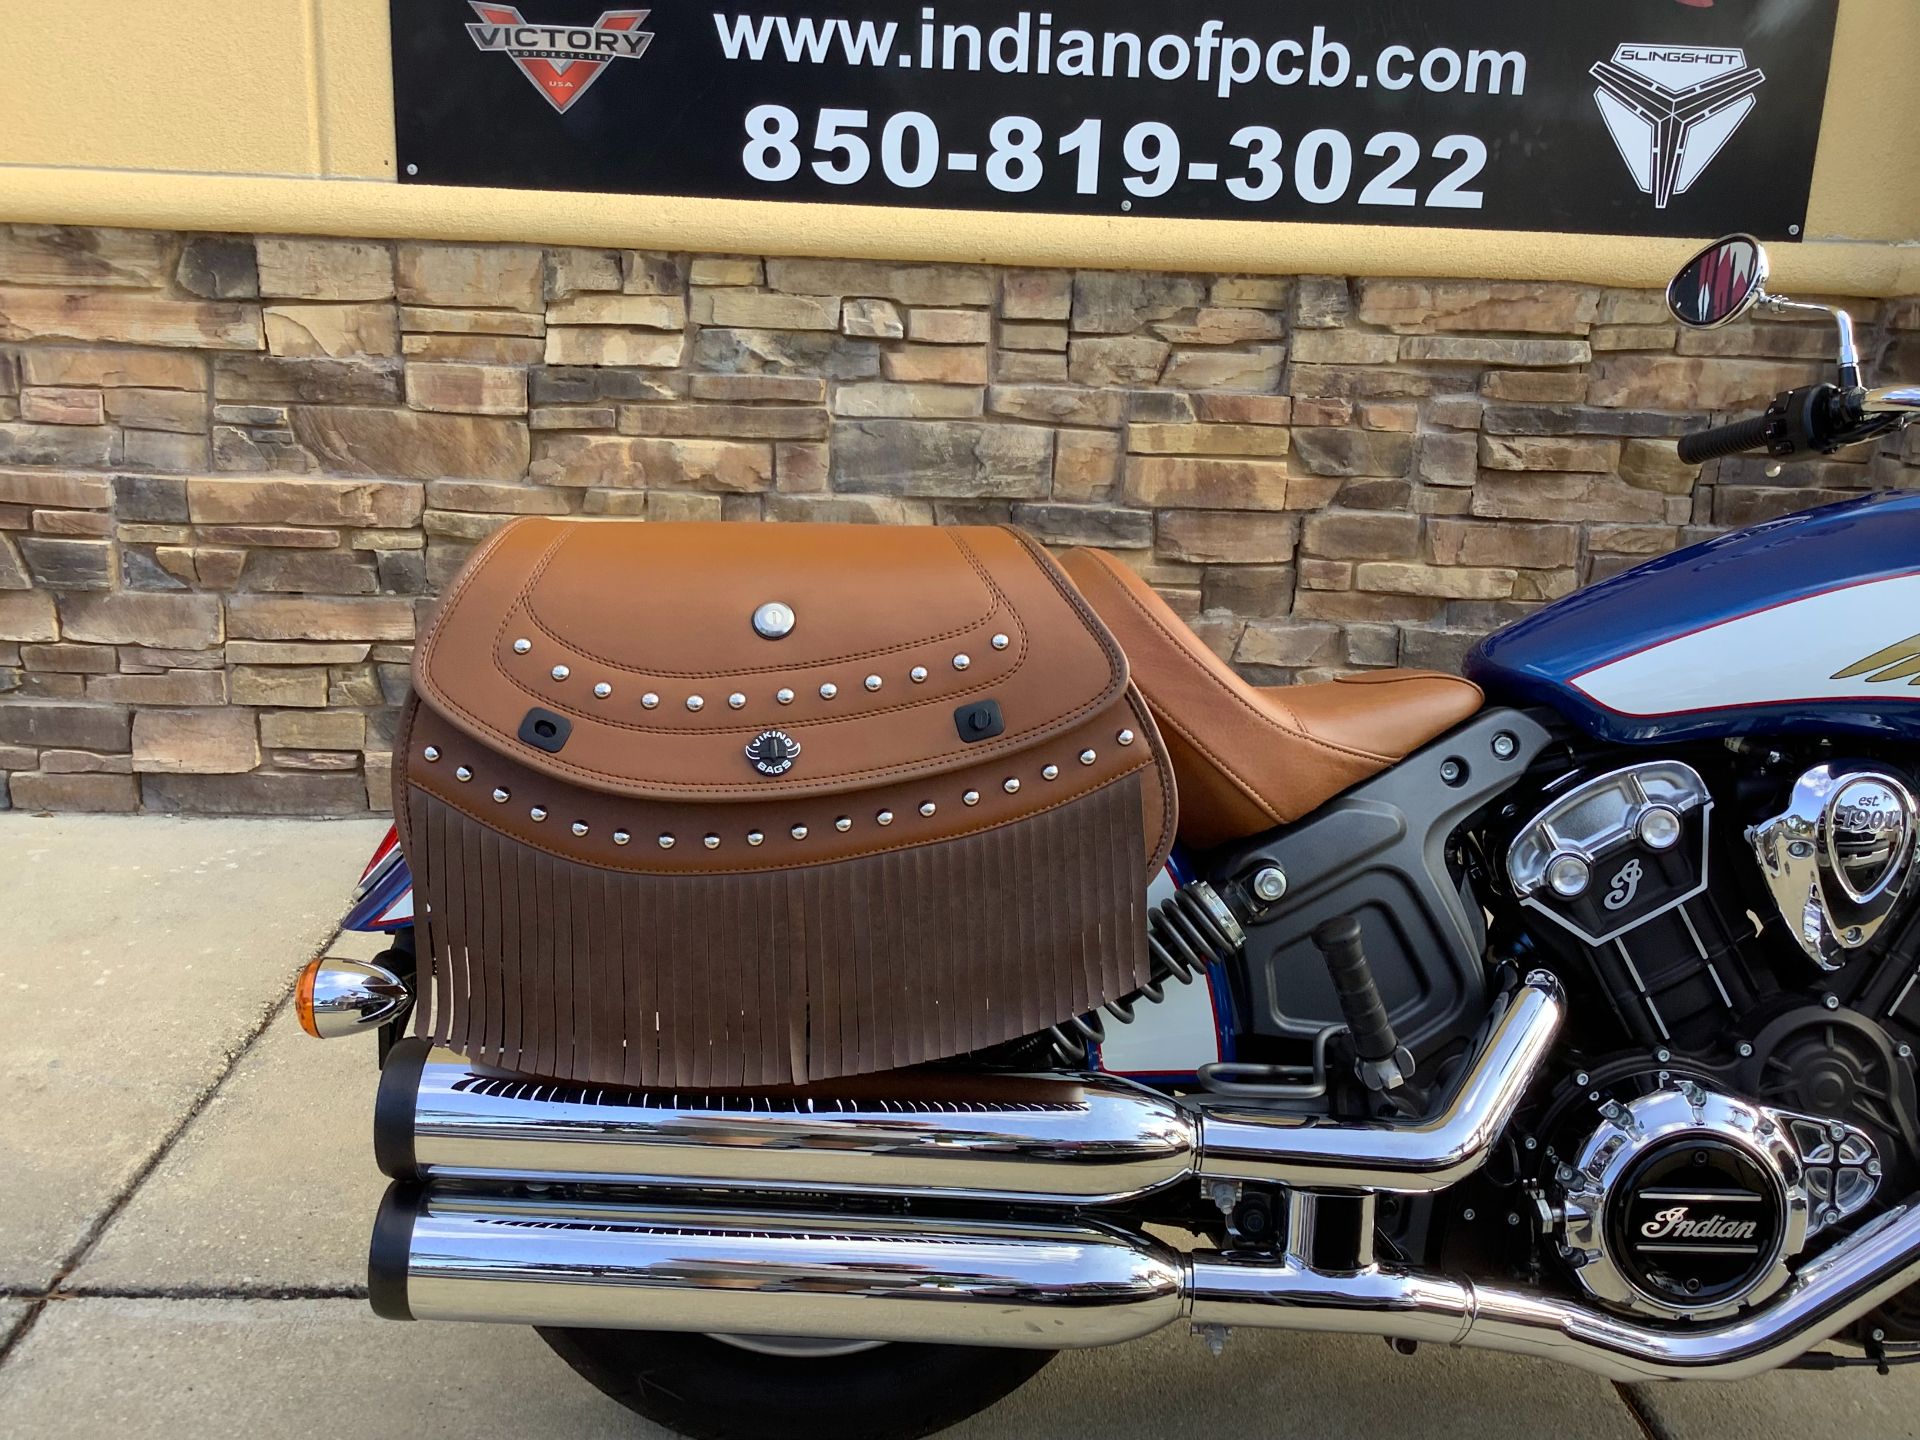 2018 Indian SCOUT ABS in Panama City Beach, Florida - Photo 5